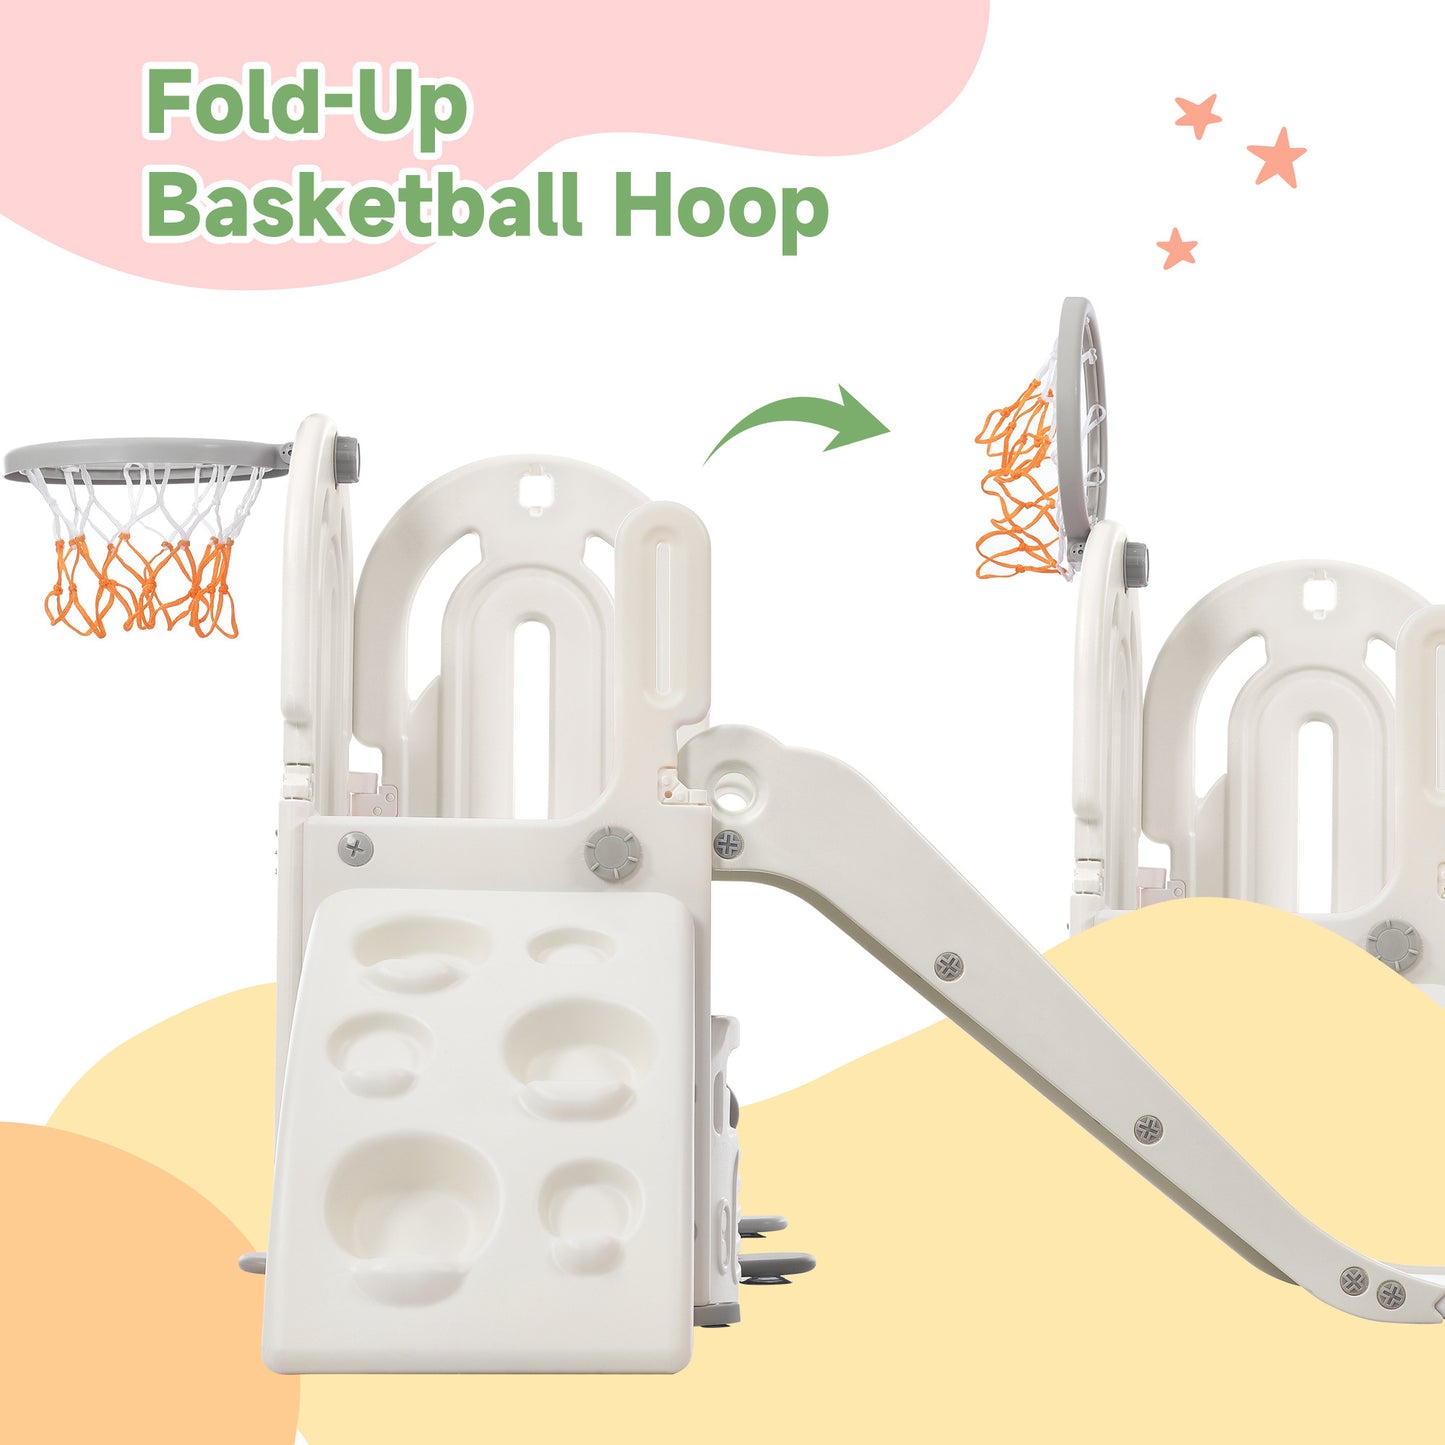 Toddler Climber and Slide Set 4 in 1; Kids Playground Climber Freestanding Slide Playset with Basketball Hoop Play Combination for Babies Indoor & Outdoor